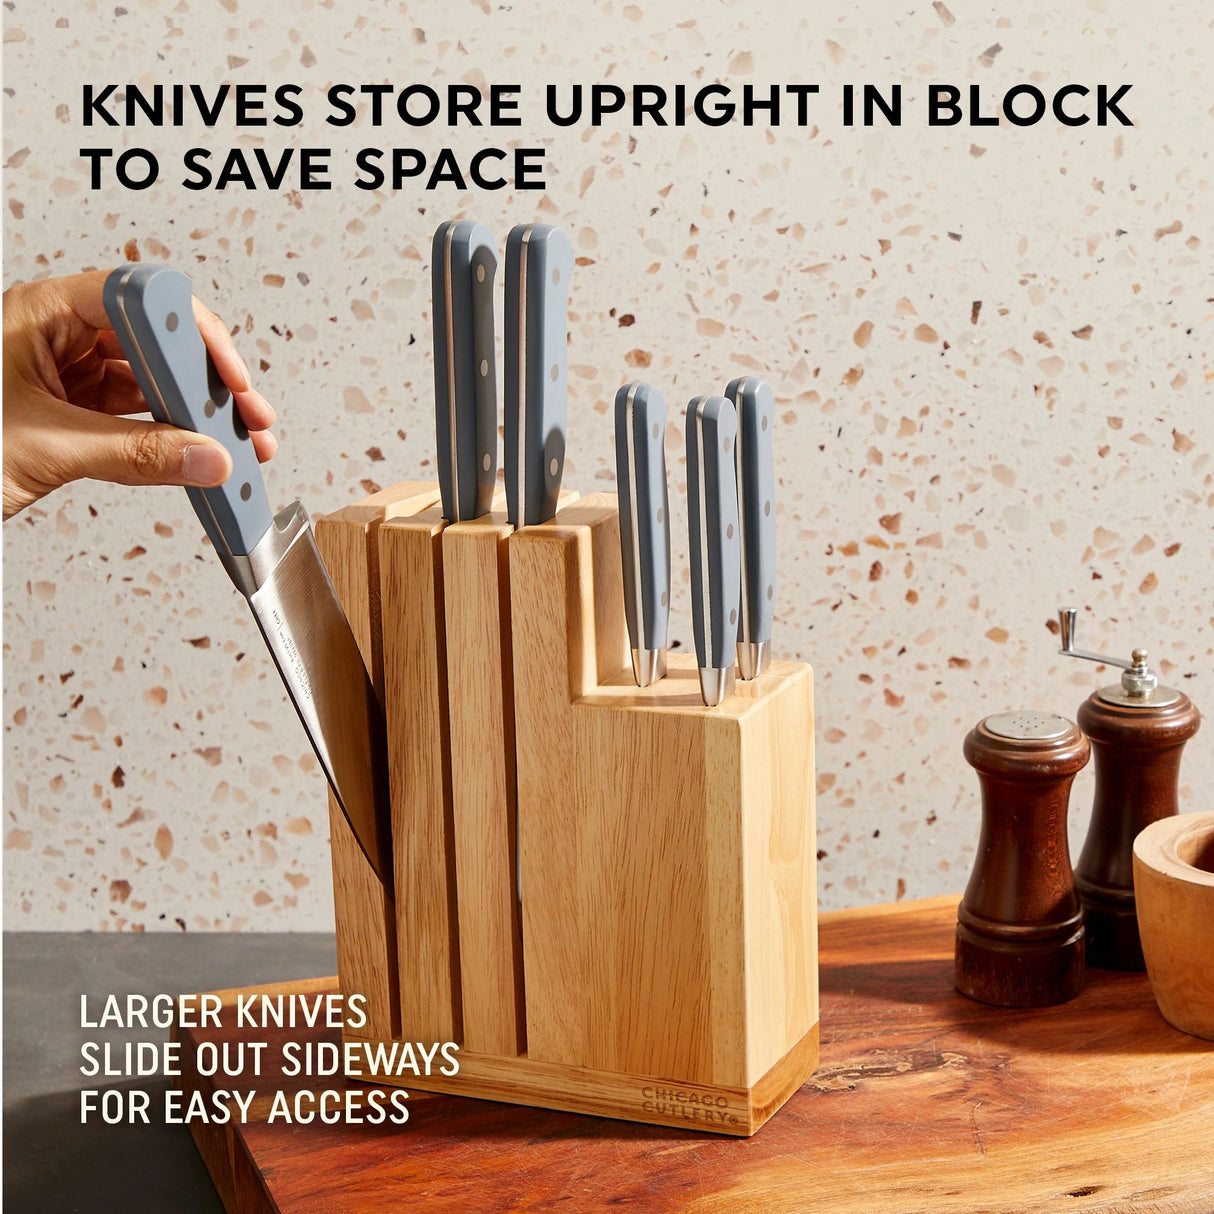  Halsted 7-piece Modular Block Set on the counter with text knives store upright in block to save space